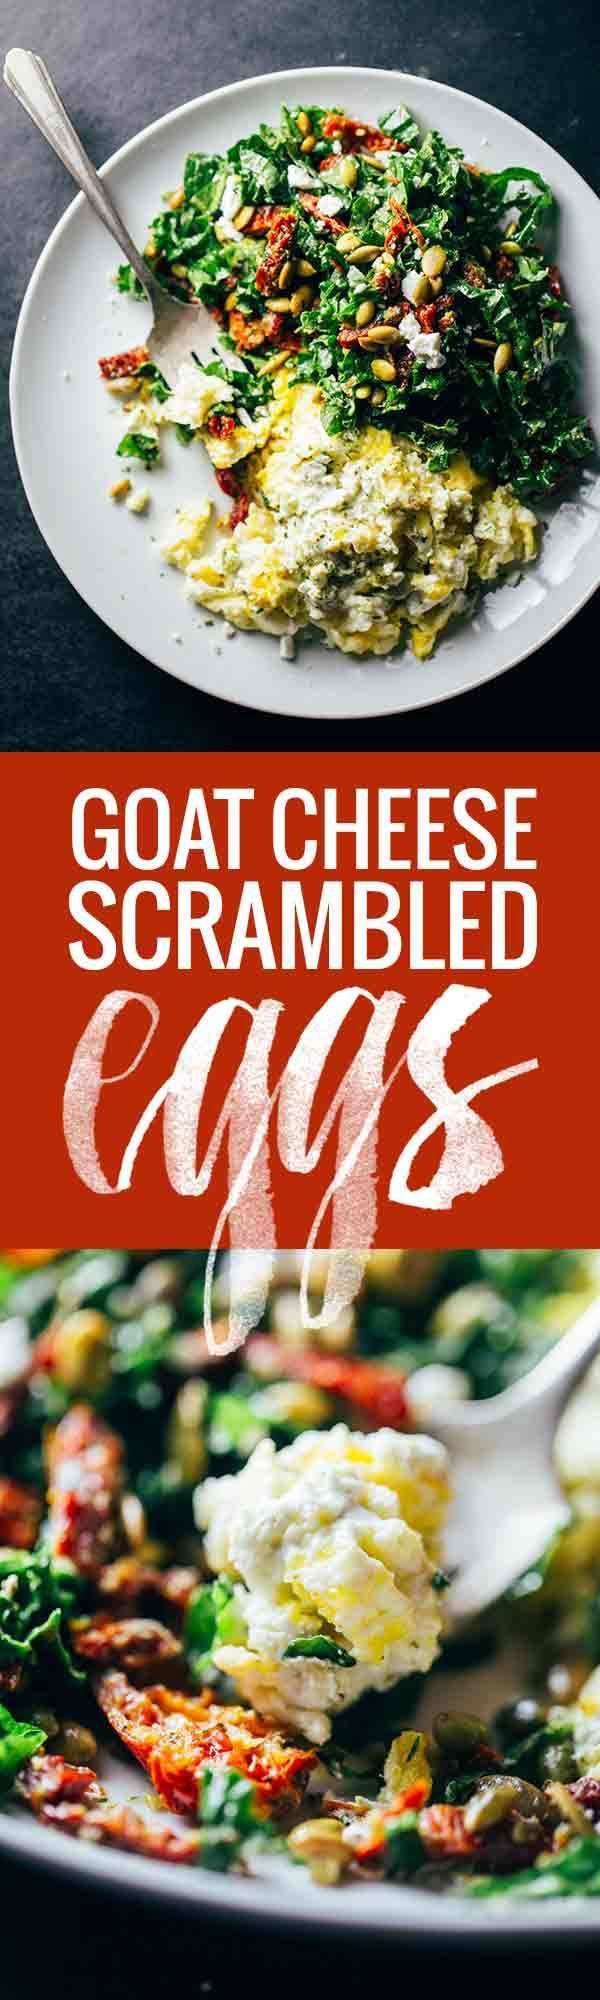 Goat Cheese Scrambled Eggs with Pesto Veggies - simple, easy, fast, healthy. 400 calories